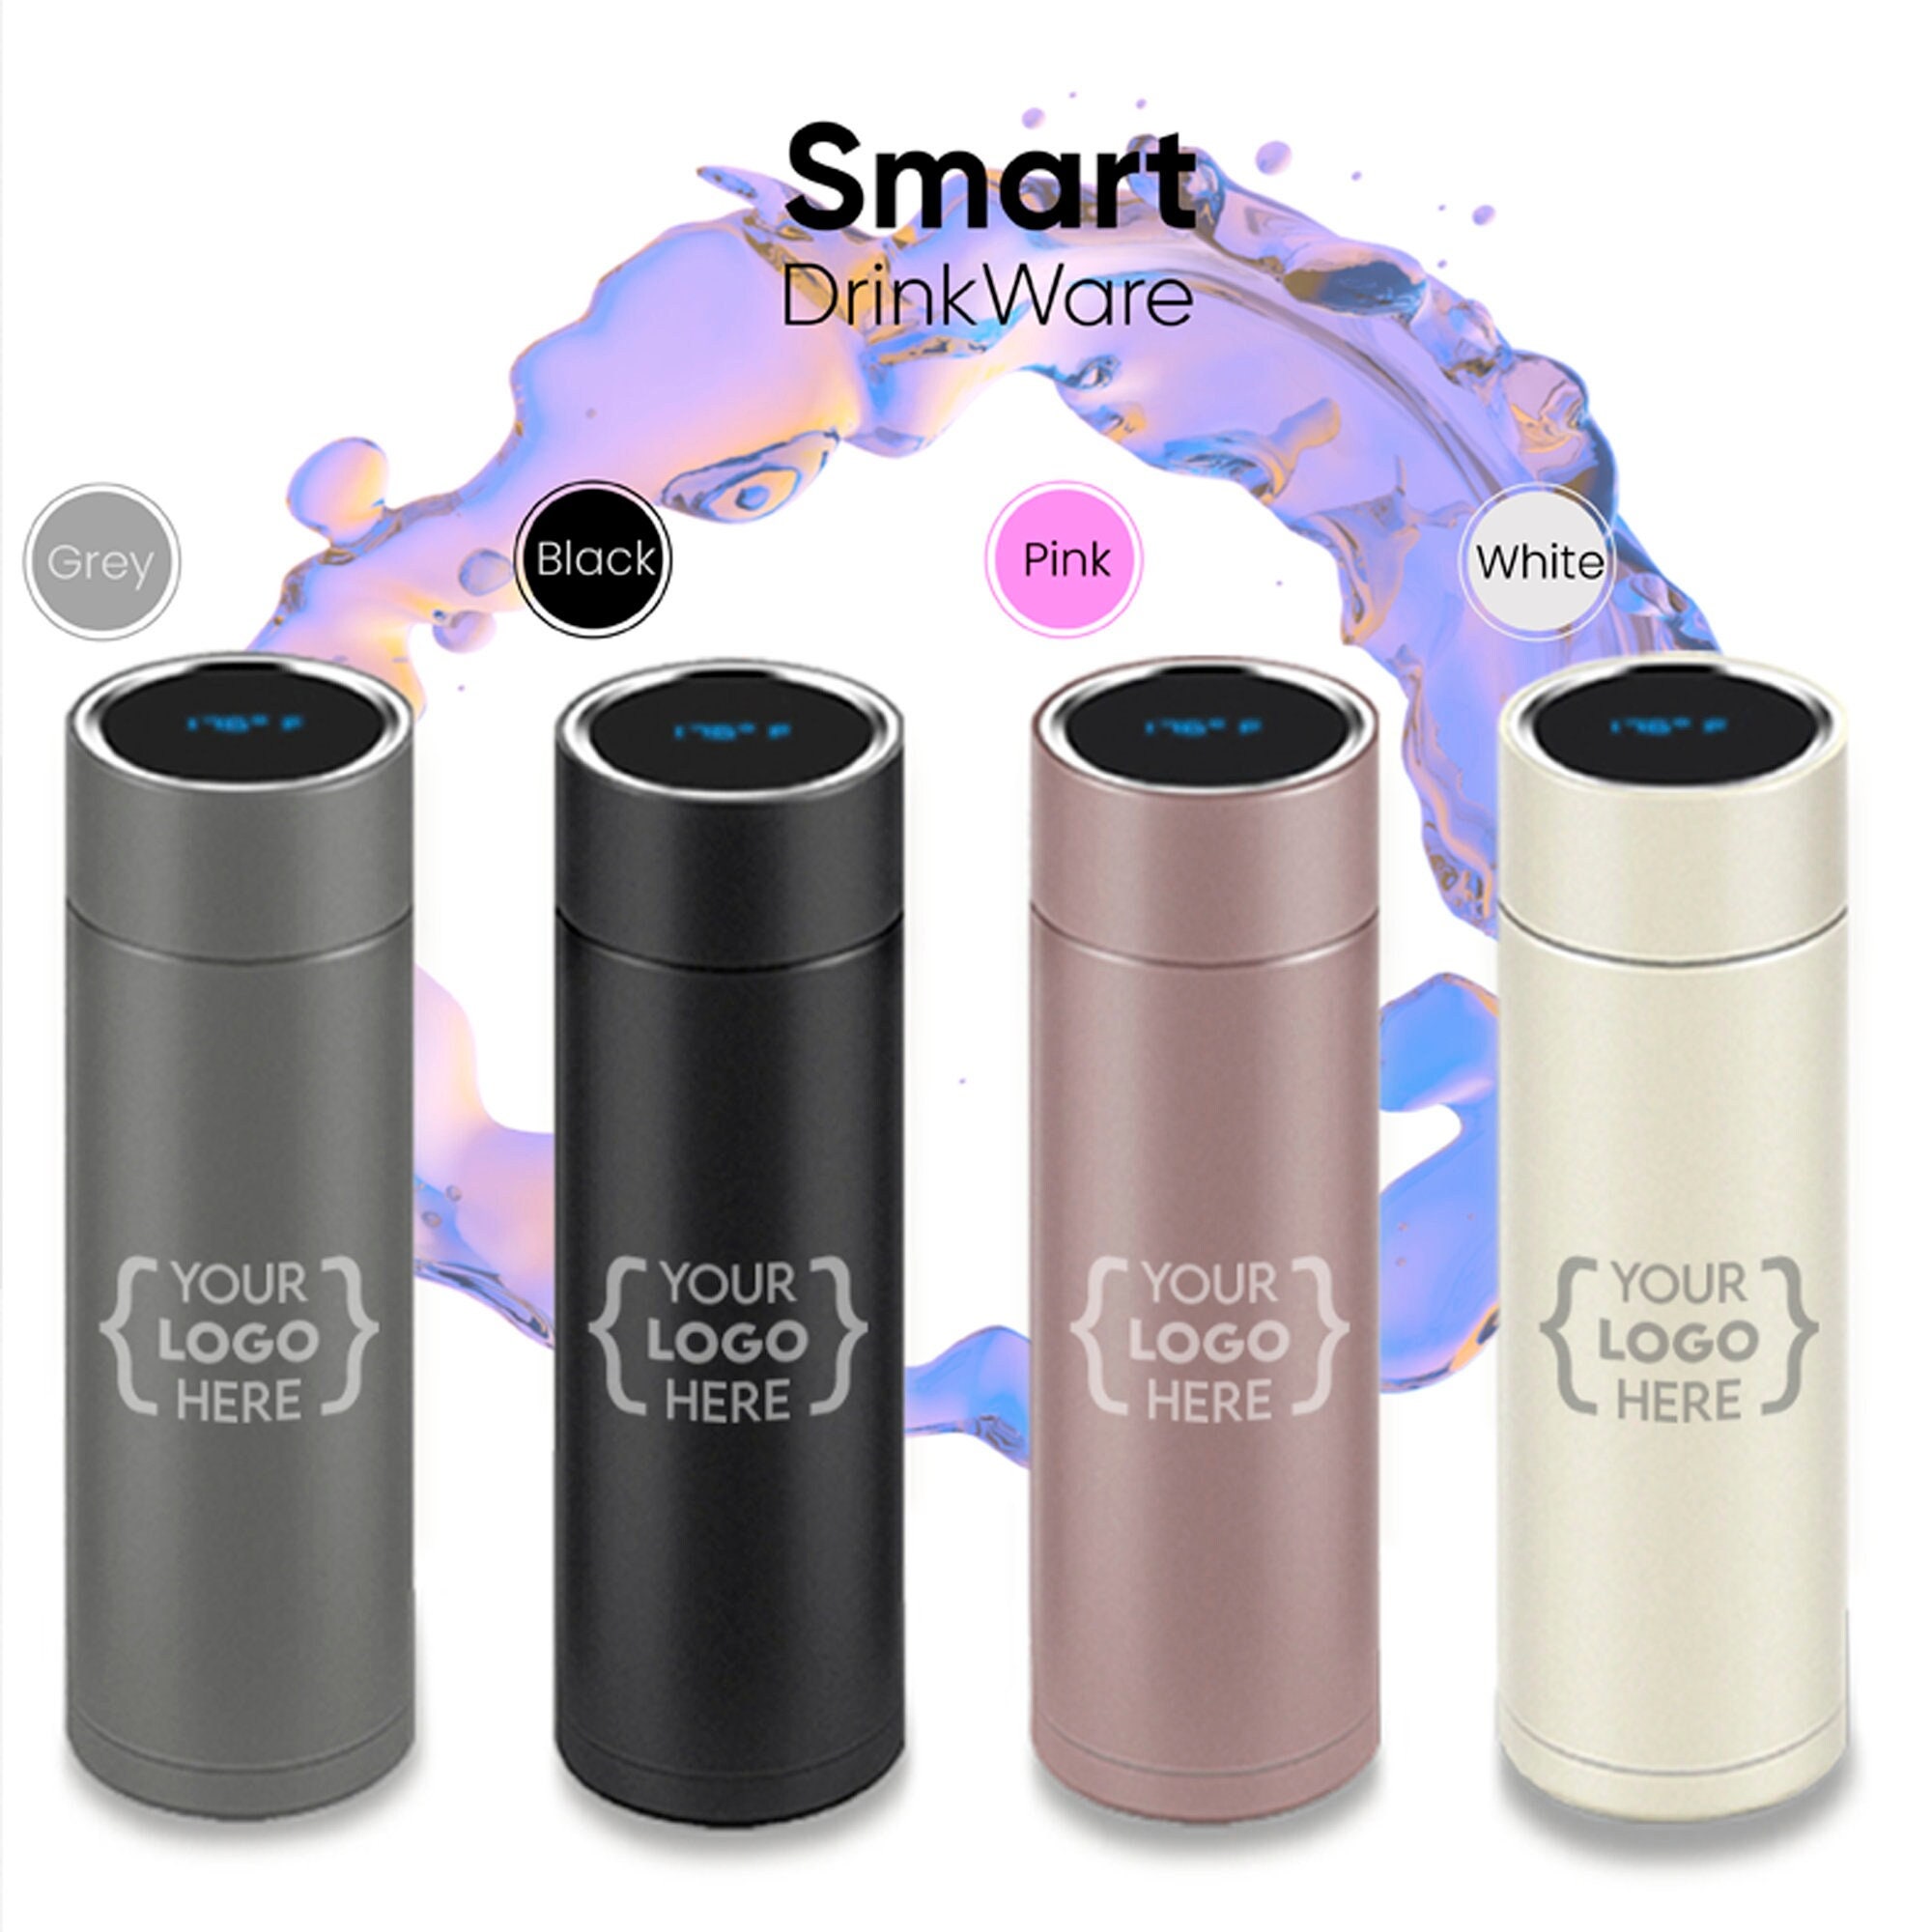 Promotional Thermos, Custom-engraved Bottle, Smart Bottle, Travel Tumbler,  Colorful Thermos, Stainless Steel Drinkware, Personalized Gift 